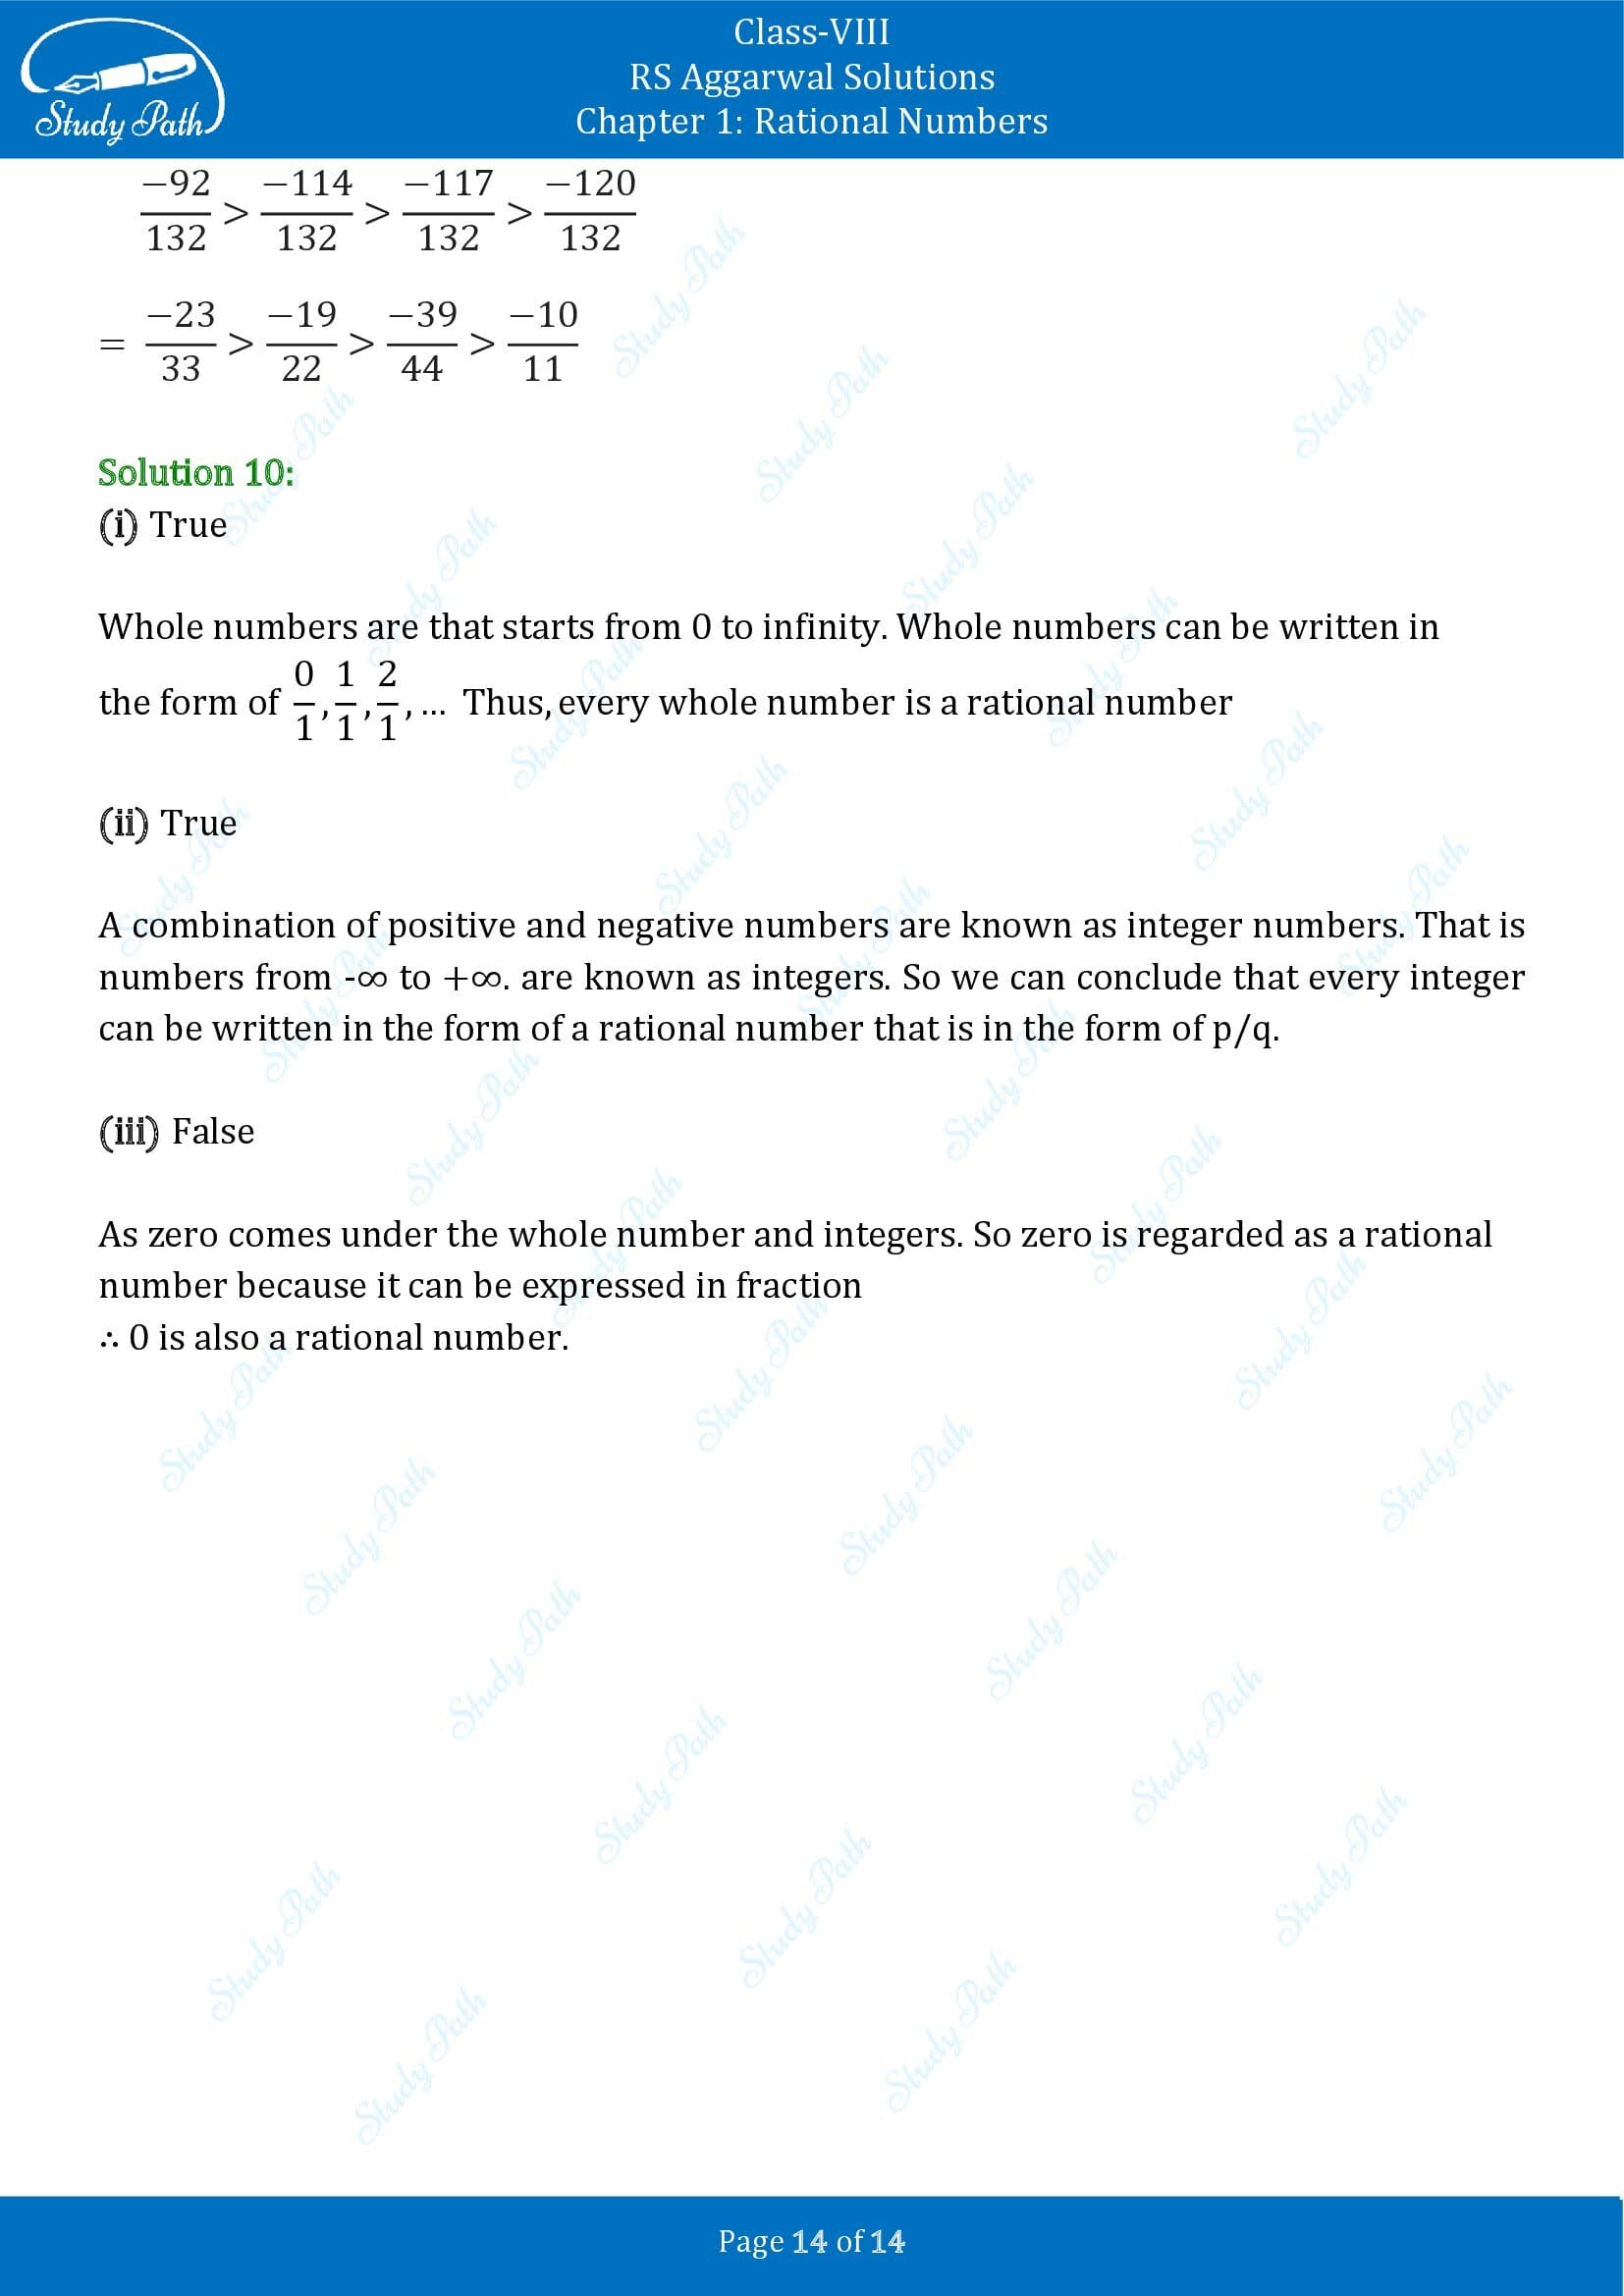 RS Aggarwal Solutions Class 8 Chapter 1 Rational Numbers Exercise 1A 00014